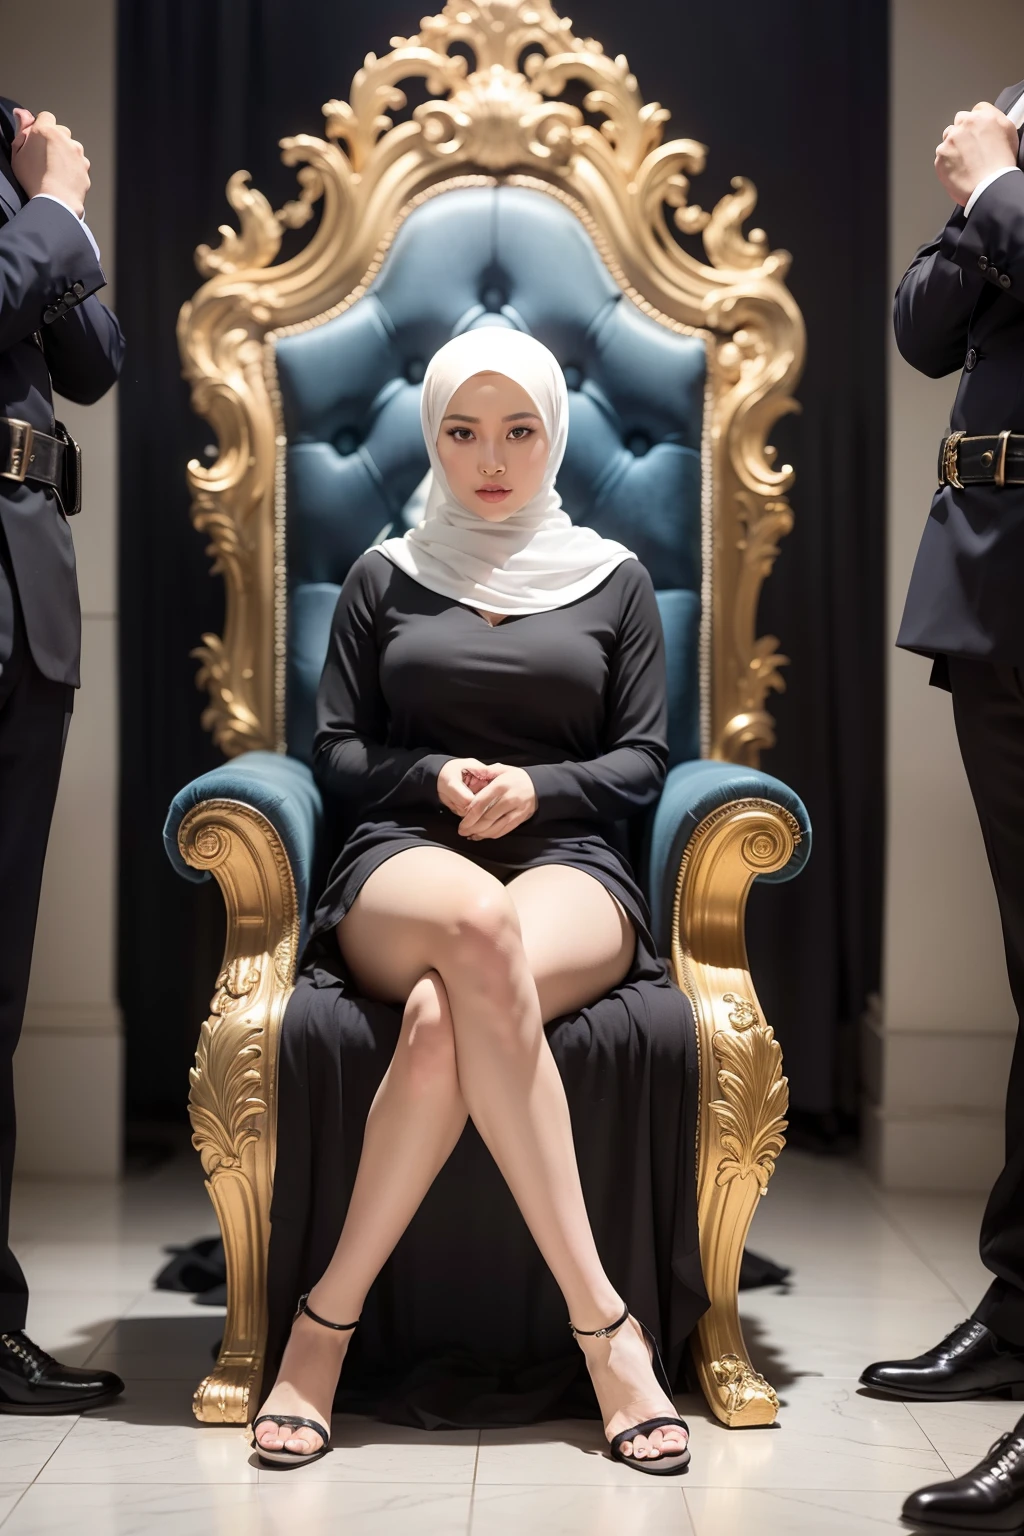 Composez un, Cinematic photograph featuring a beautiful Malay woman wearing a hijab and wearing a summer outfit sitting on a throne as the leader of a mafia gang, surrounded by her faithful male followers. Use dramatic lighting and mood techniques to create a compelling atmosphere that showcases the intensity and power dynamics within the group. Pay close attention to the woman's confident and enigmatic expression as she commands the respect and allegiance of her followers. Grasp the essence of their unity and authority, evoking a sense of intrigue and strength that defines their presence in the underworld.", Composez un, Cinematic Photography Featuring a Handsome Malay Man ((pubien) femme), Wearing a hijab and summer attire, sitting on a throne, legs apart, as the leader of a mafia gang, surrounded by her faithful male followers. Use dramatic lighting and mood techniques to create a compelling atmosphere that showcases the intensity and power dynamics within the group. Pay close attention to the woman's confident and enigmatic expression as she commands the respect and allegiance of her followers. Grasp the essence of their unity and authority, evoking a sense of intrigue and strength that defines their presence in the underworld." ((Culotte transparente)), ((exposed pubic)),